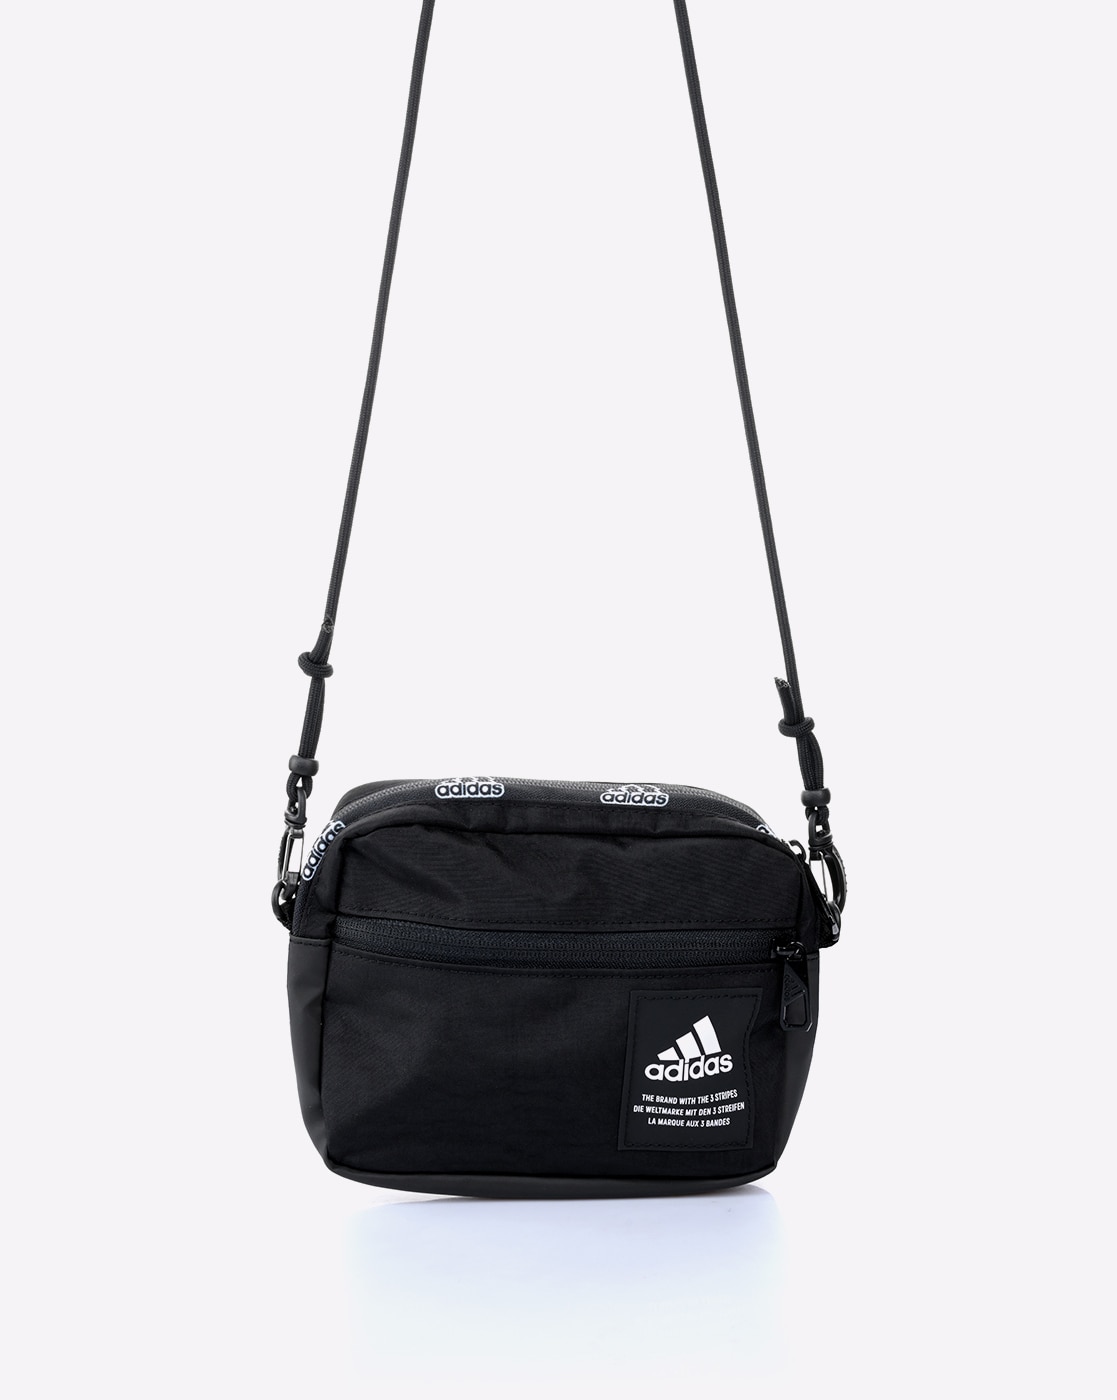 Shipped within 6 hours] adidas Man Purse Crossbody Bag Shoulder Bags  Waterproof Man Bag Messenger | Shopee Philippines